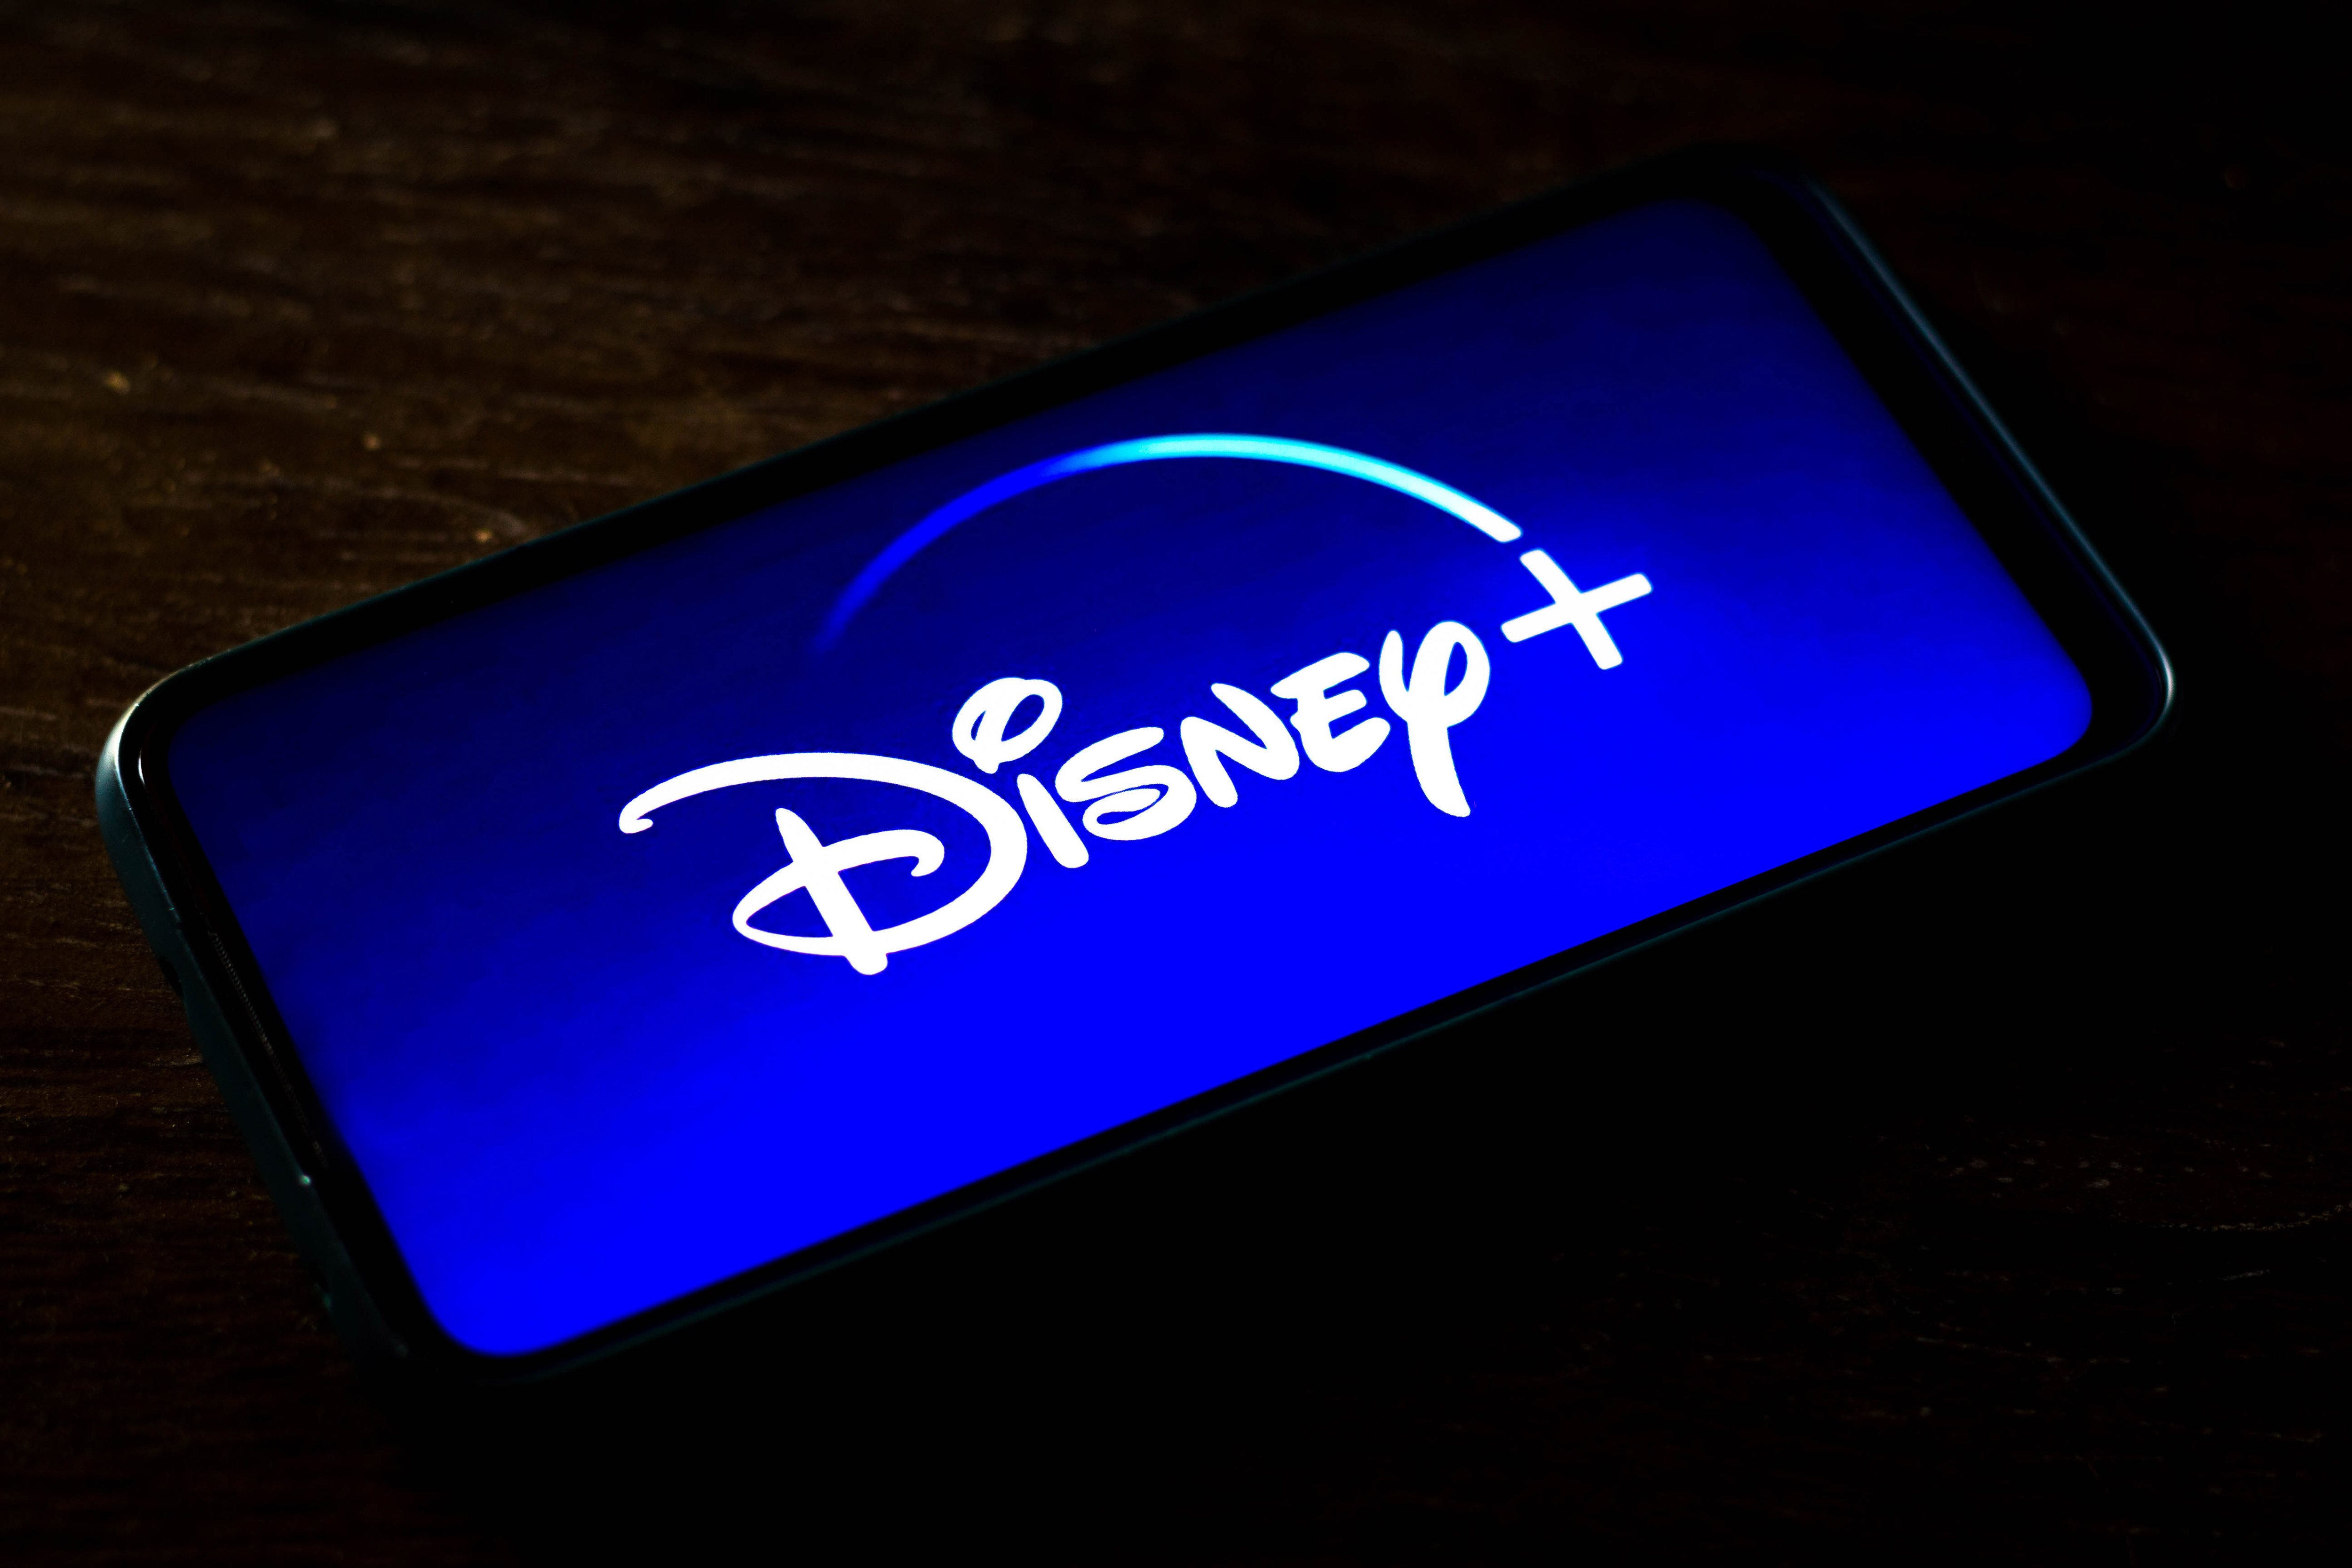 DEAL Alert! Get Disney+ For $1.99 Per Month With This Offer